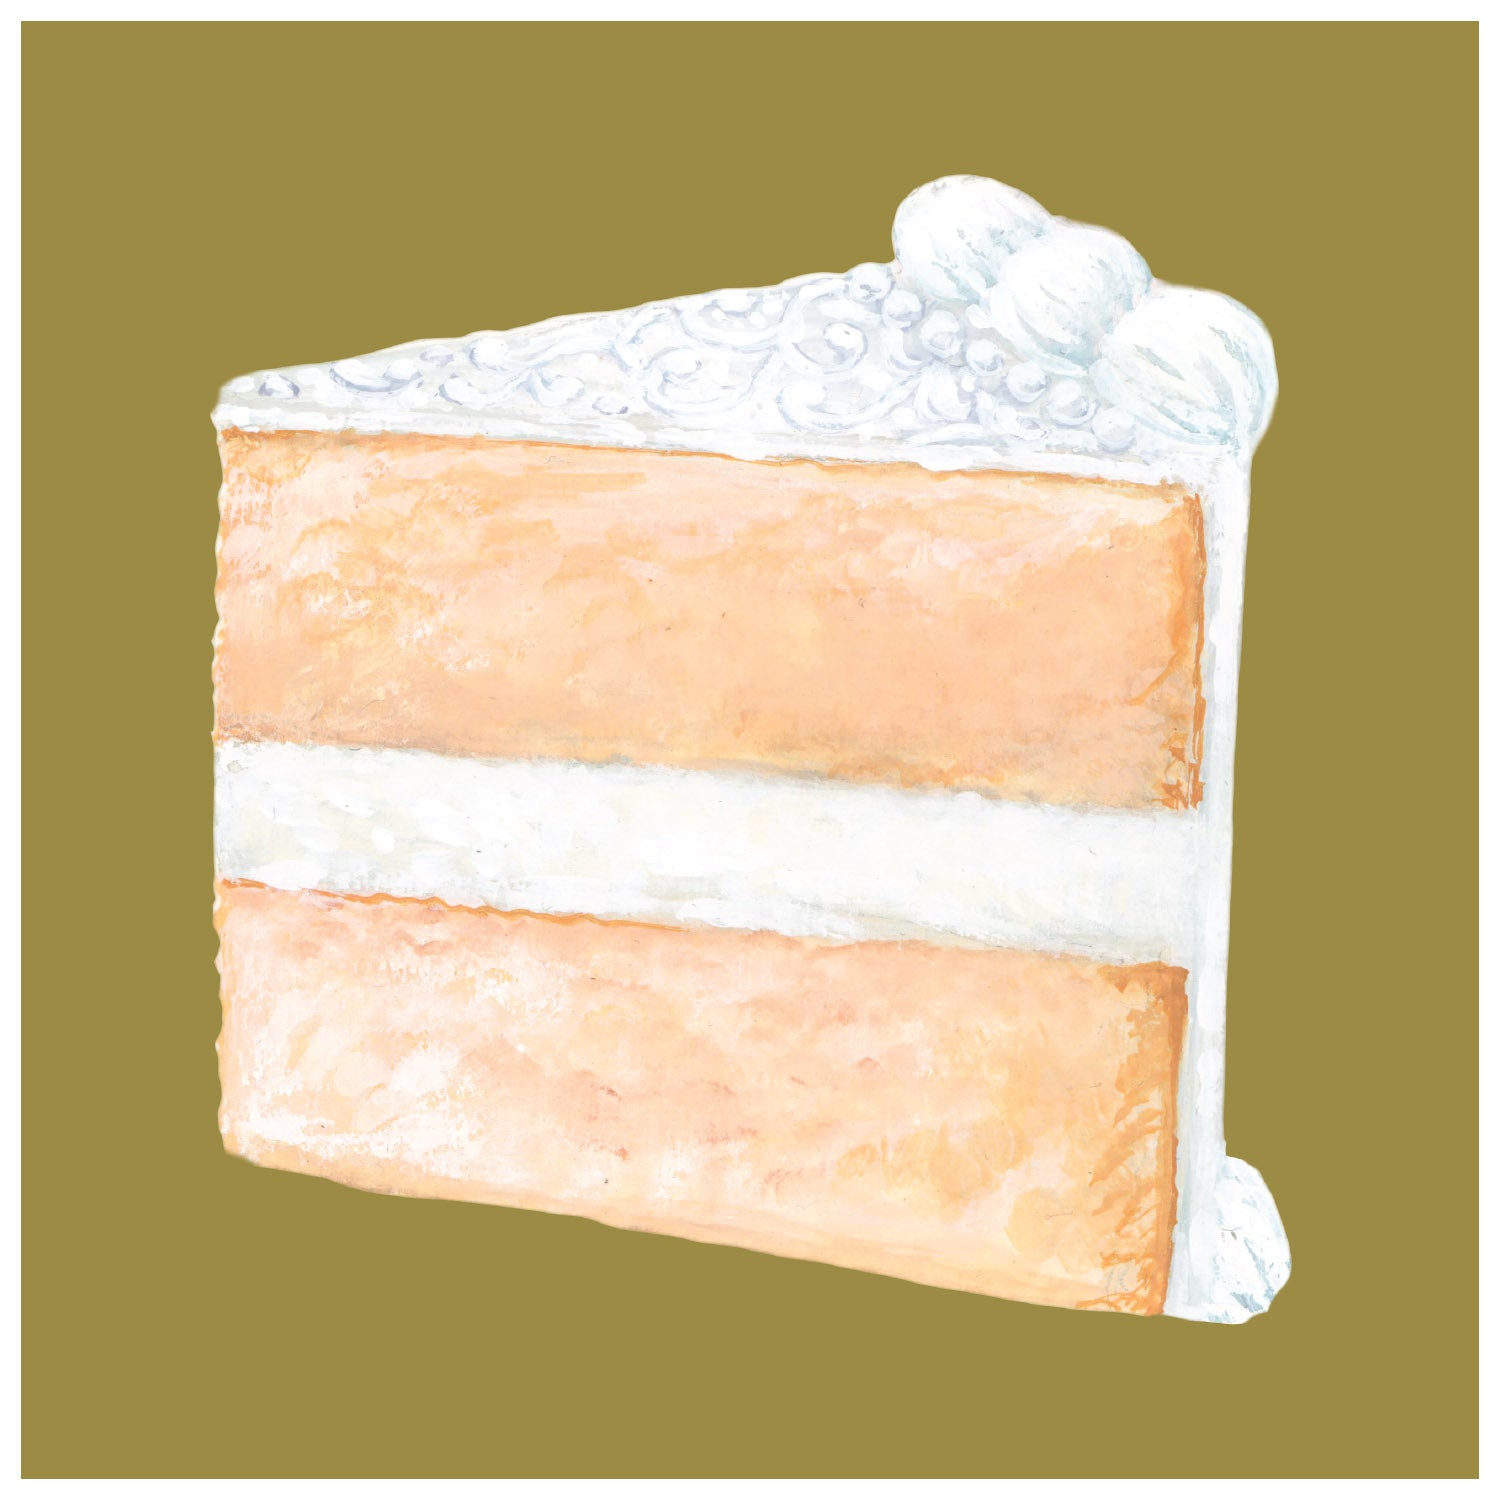 A gold, square cocktail napkin featuring an illustrated slice of cream-colored cake with white icing.